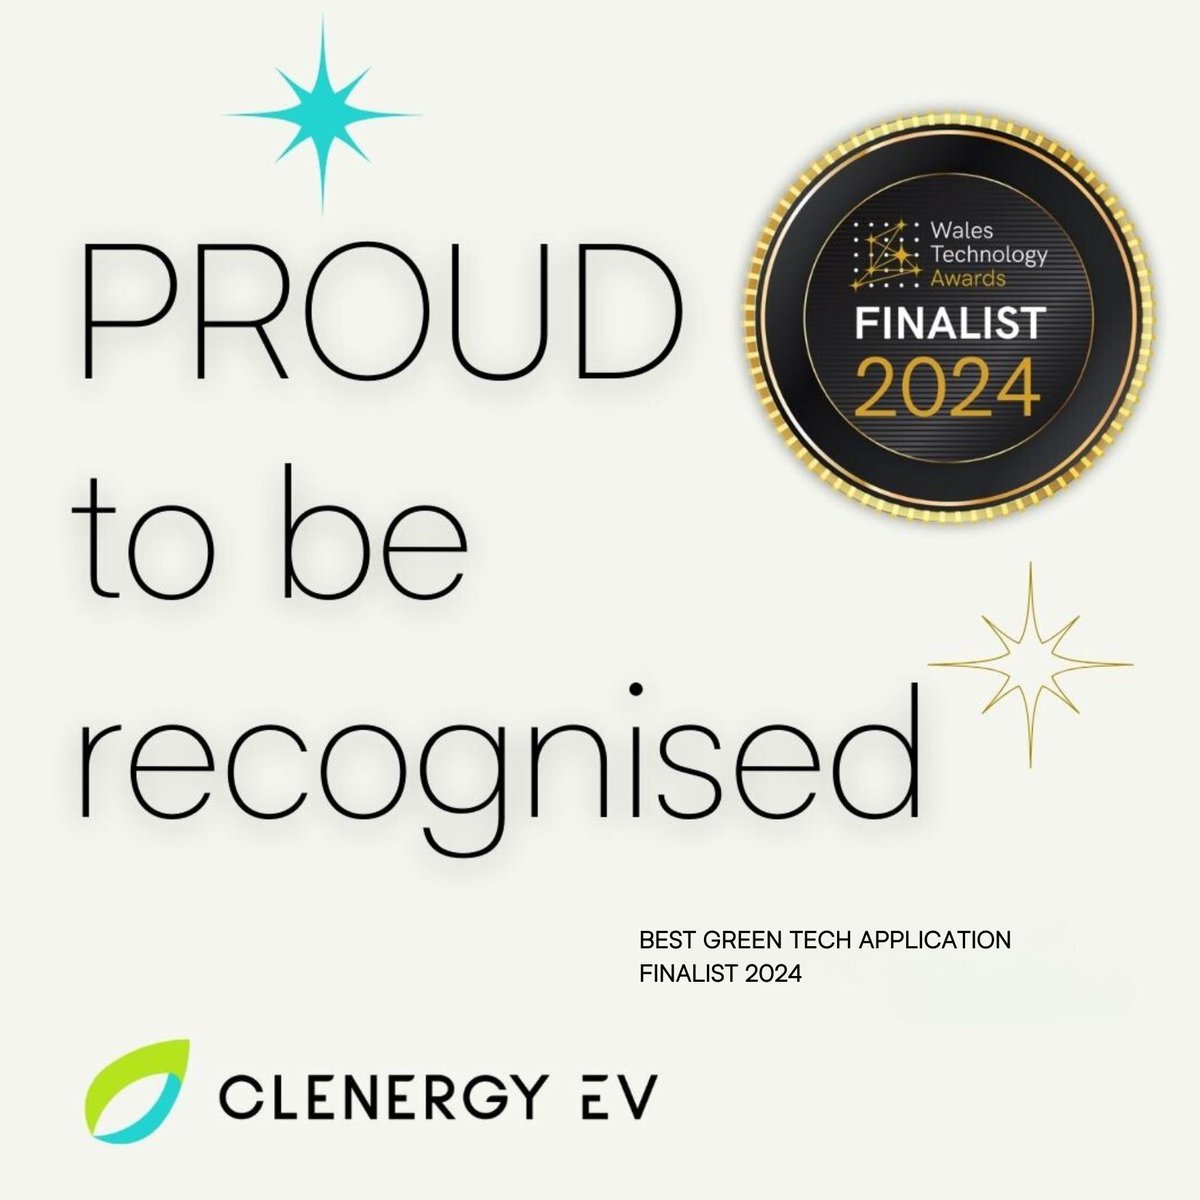 Thrilled to be selected as a finalist for Best Greentech Application for the Wales Technology Awards 2024! 🎉 ✨ Proud to be recognised for the part we play in combating climate change by revolutionising the EV charging experience. Looking forward to awards night 22 March! 🥂